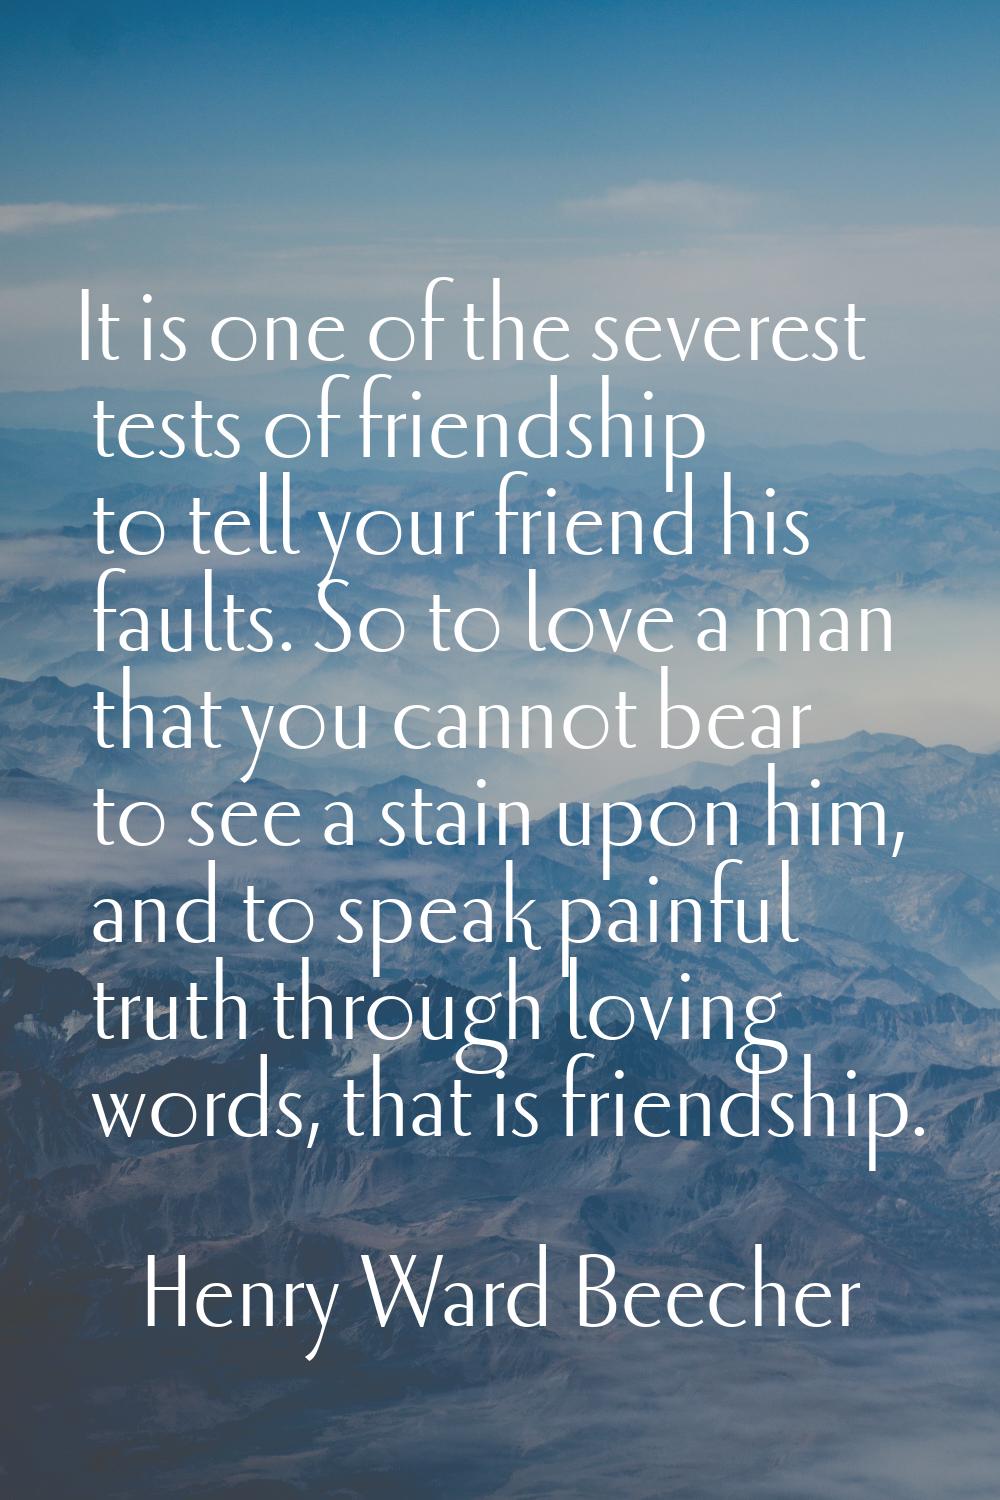 It is one of the severest tests of friendship to tell your friend his faults. So to love a man that